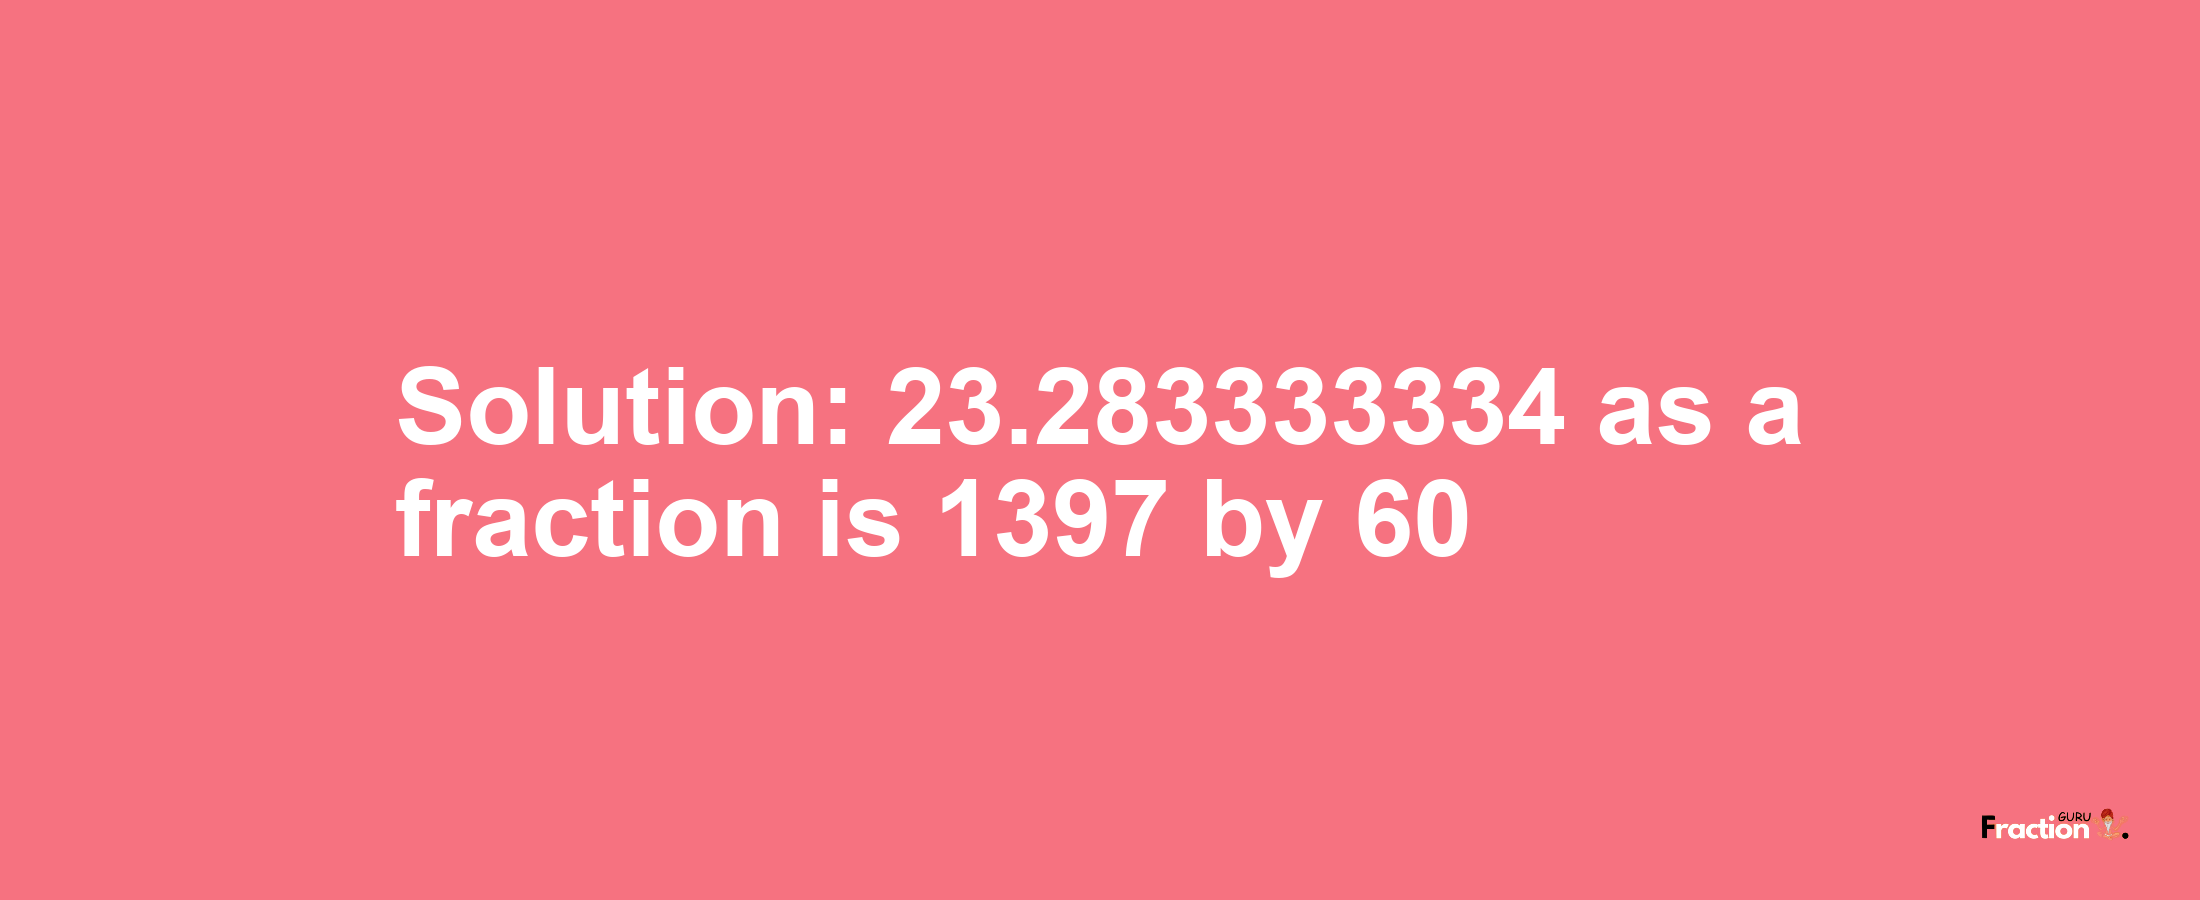 Solution:23.283333334 as a fraction is 1397/60